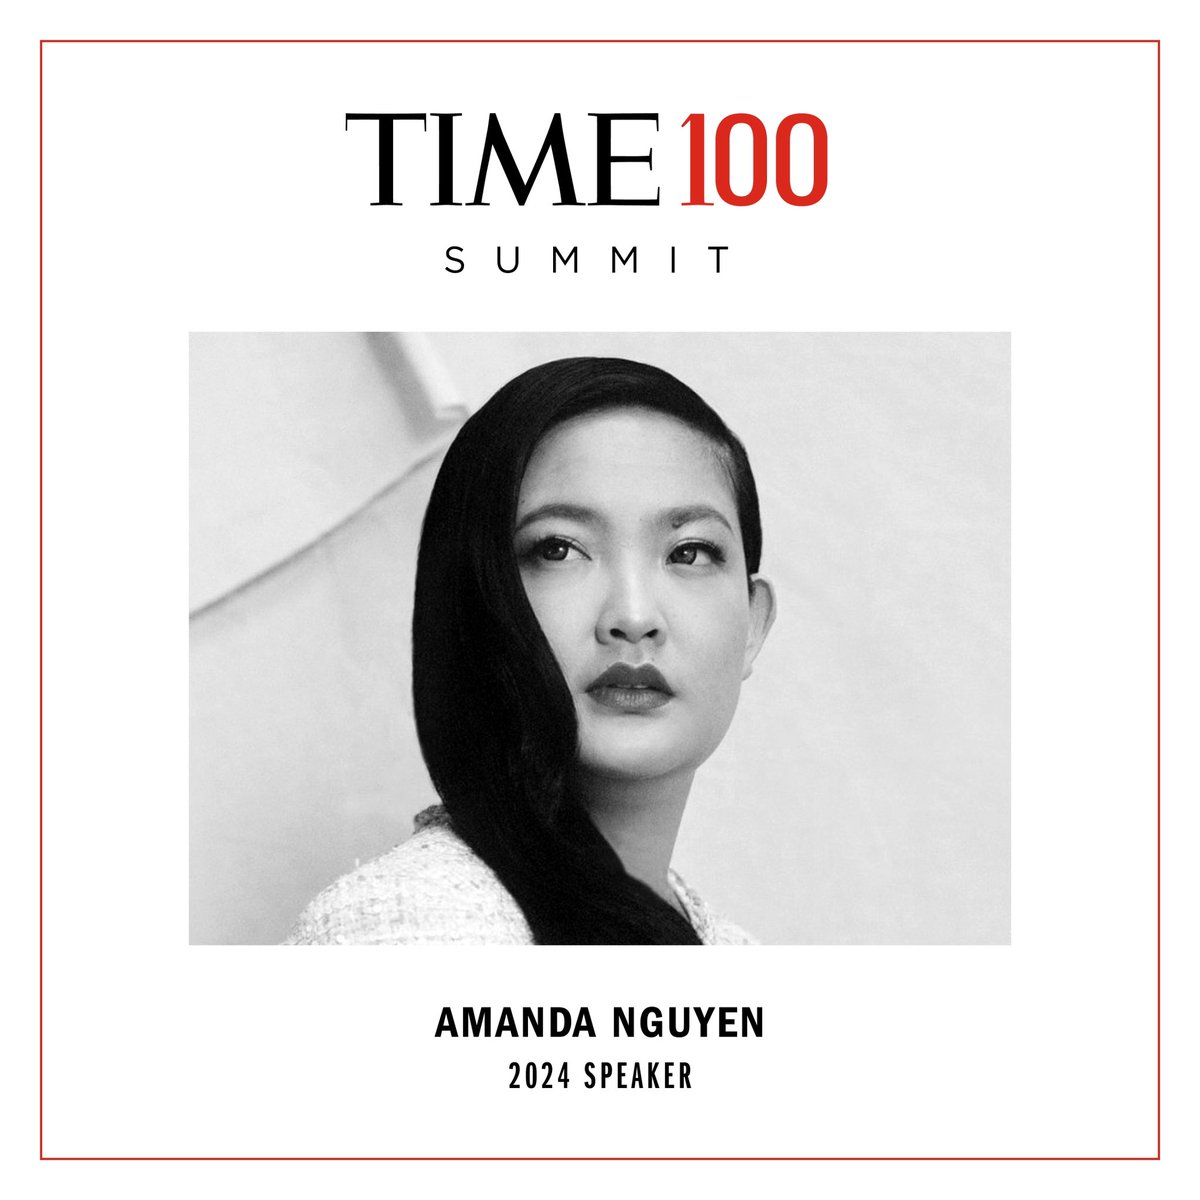 I'm thrilled to be one of the speakers at the 2024 #TIME100 Summit on April 24. After the event, you'll be able to watch highlights and the full video of my session here: time.com/summit @TIME